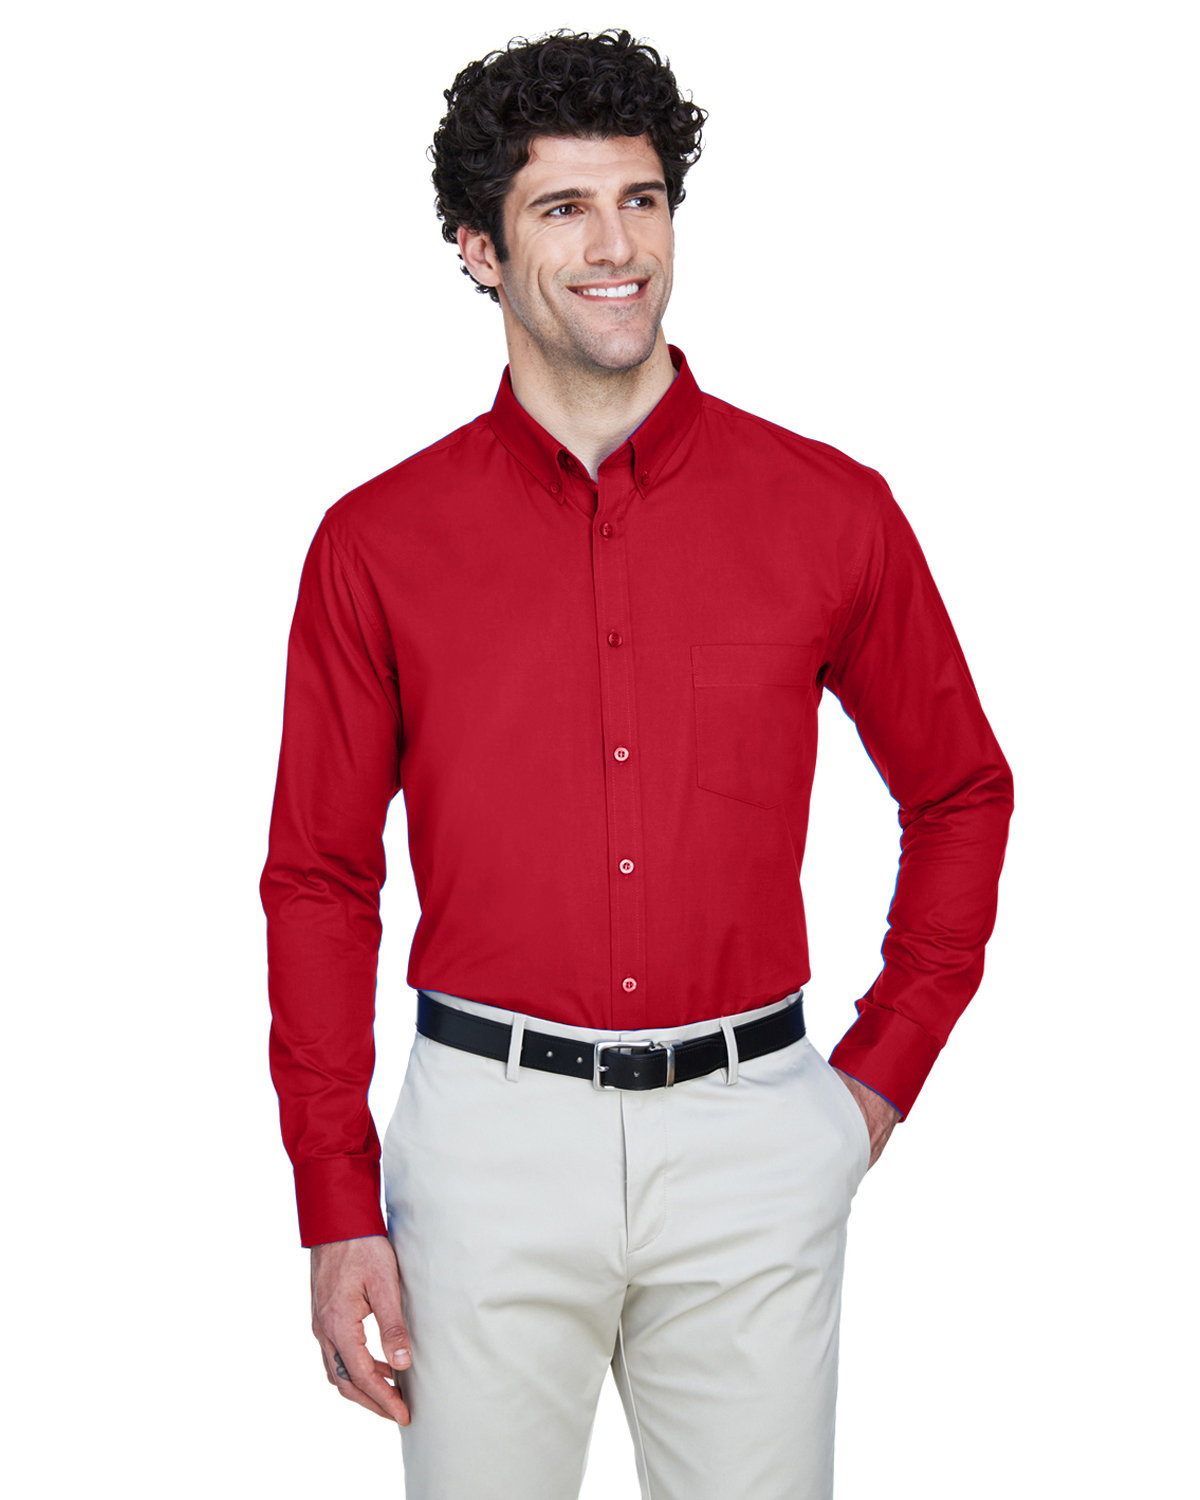 Core 365 Men's Operate Long-Sleeve Twill Shirt CLASSIC RED 